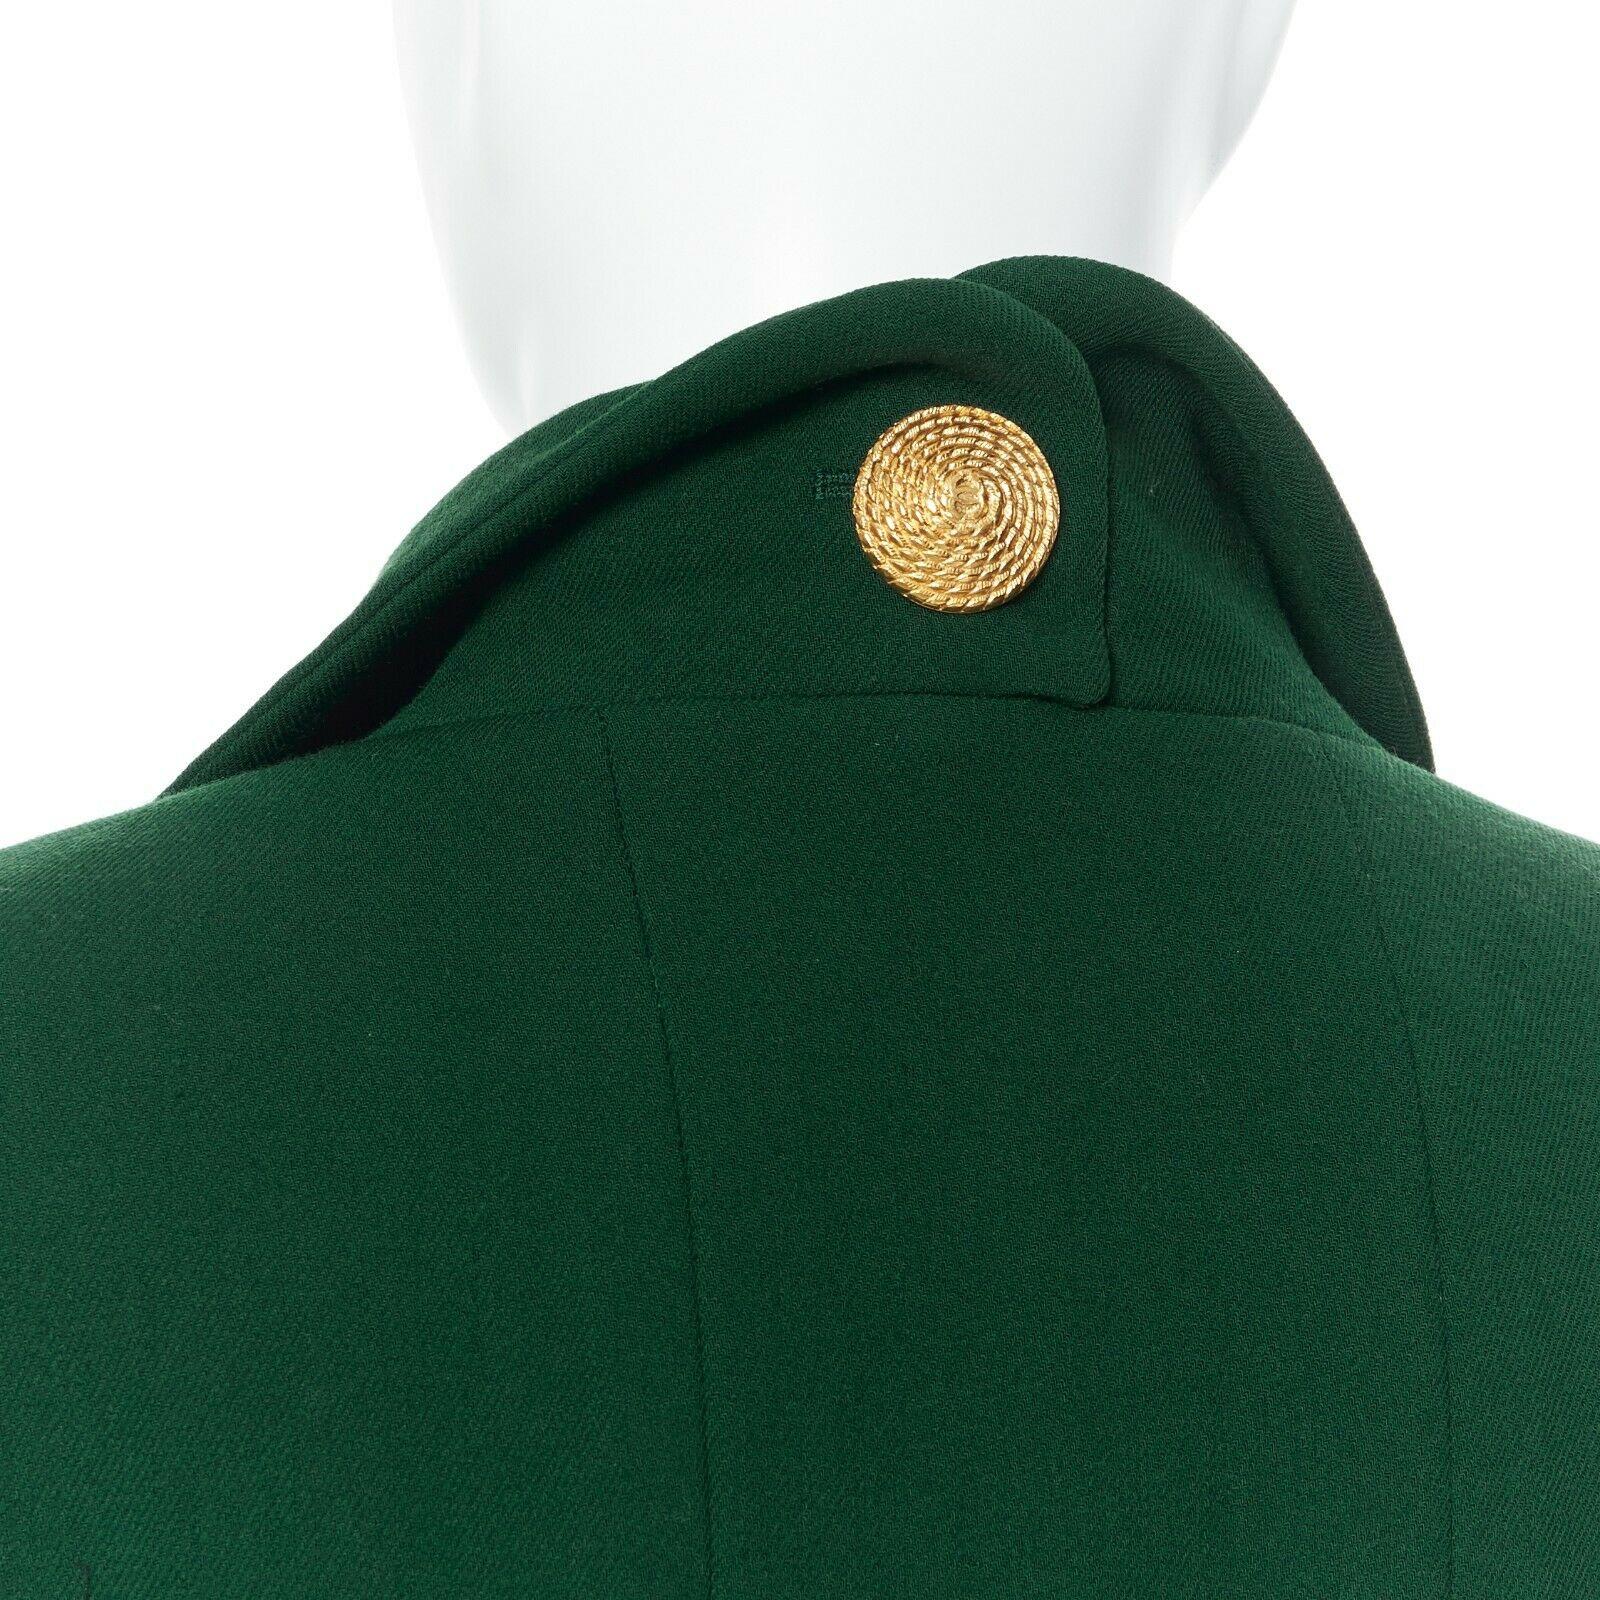 Women's CHANEL 92A vintage emerald green 4 pockets gold buttons tailored jacket